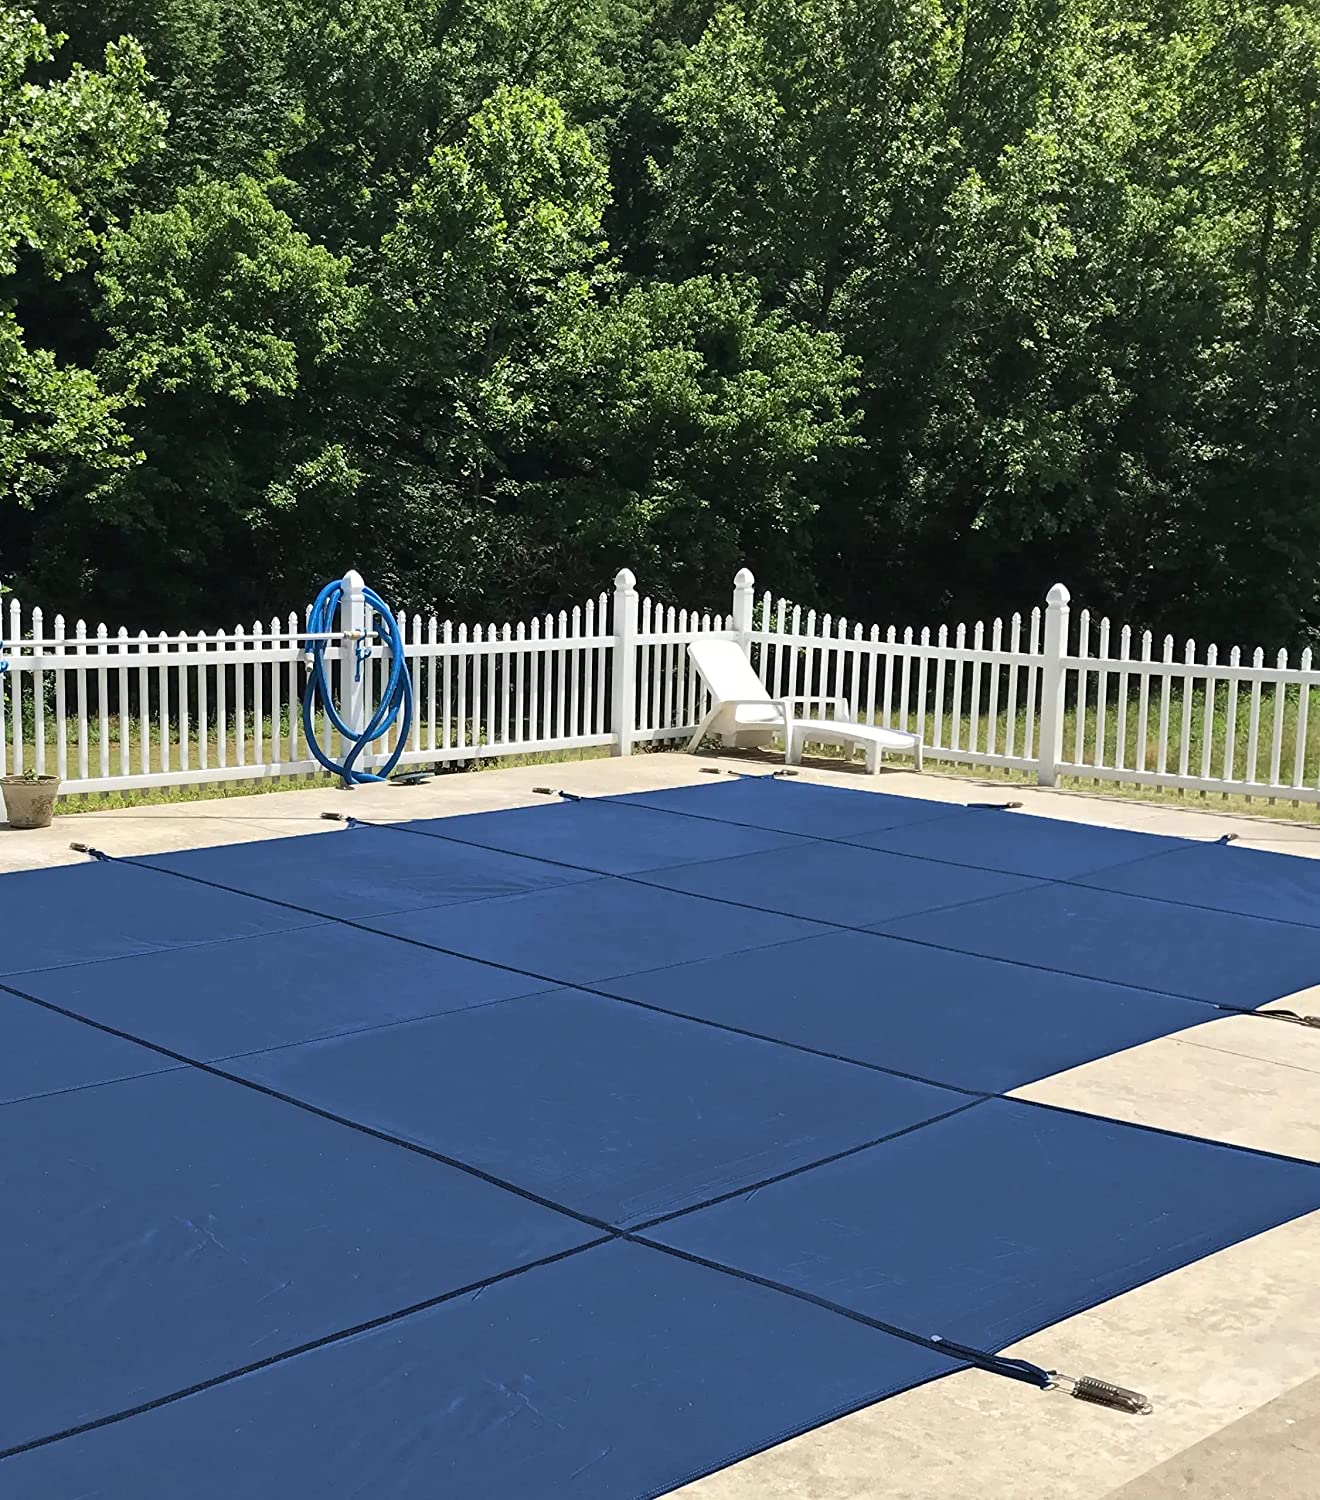 Residential & Commercial Winter Debris Swimming Pool Covers